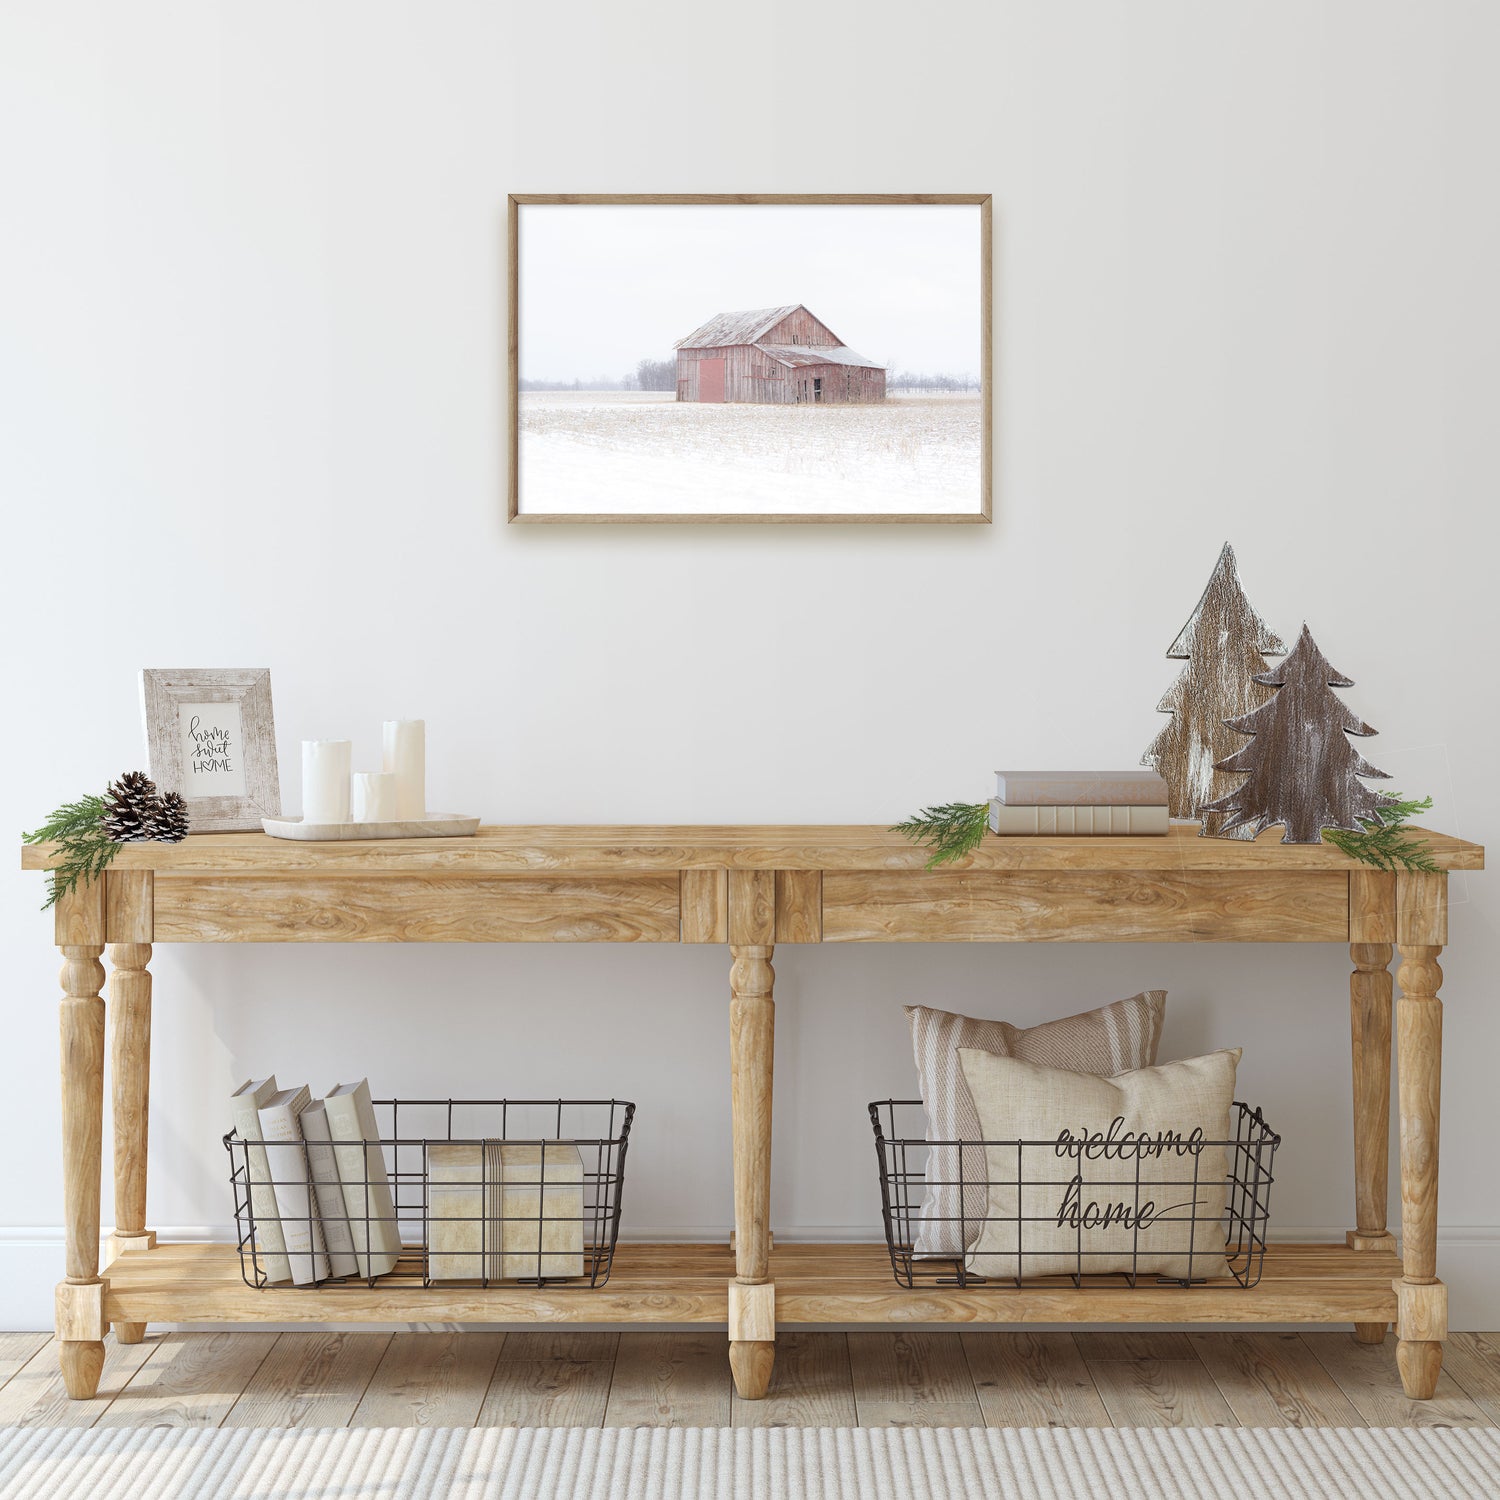 Red barn in winter snow storm wall art print